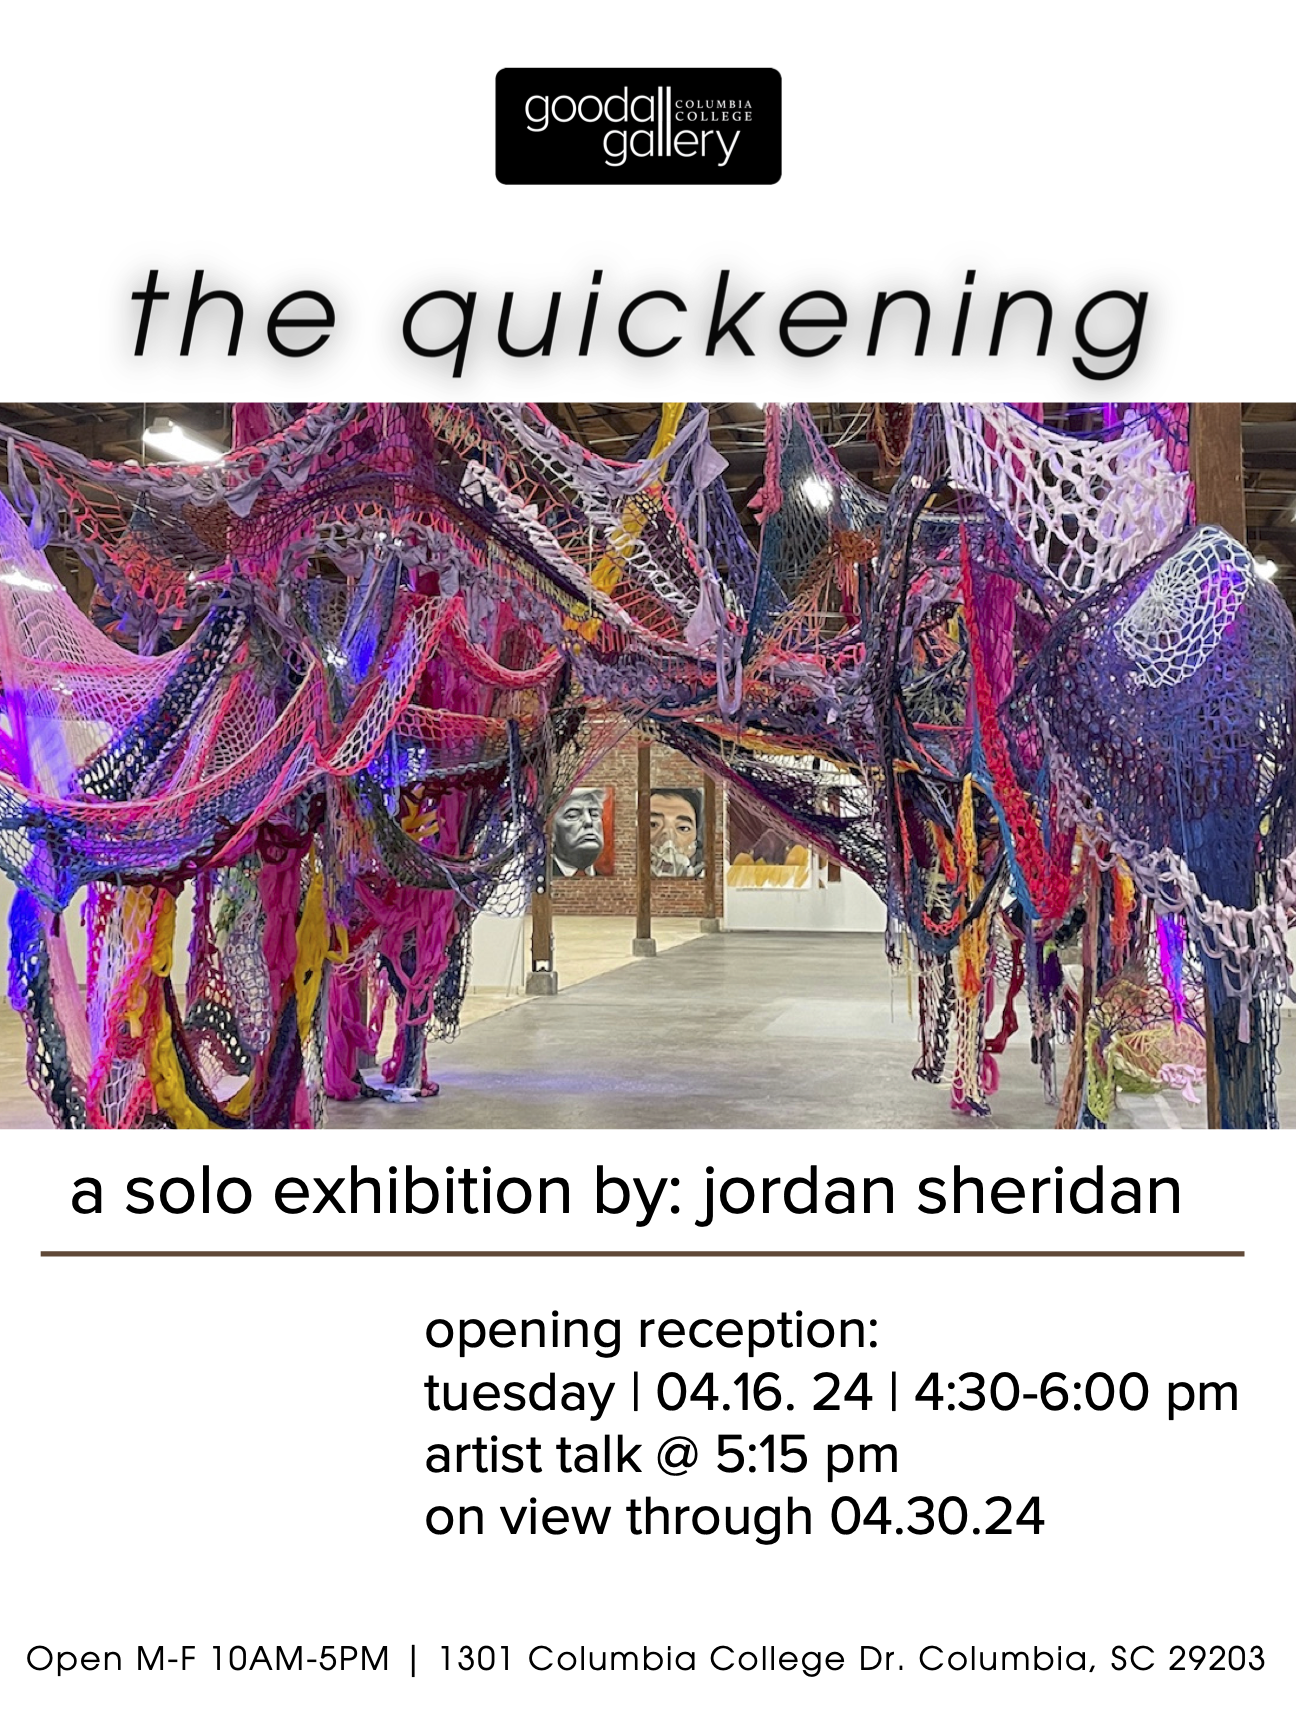 the quickening - a solo exhibition by: jordan sheridan - opening reception - tuesday - 04.16.24 | 4:30-6pm - artist talk @ 5:15pm - on view through 04.30.24 - open m-f 10am-5pm | 1301 columbia college dr. Columbia, SC 29203